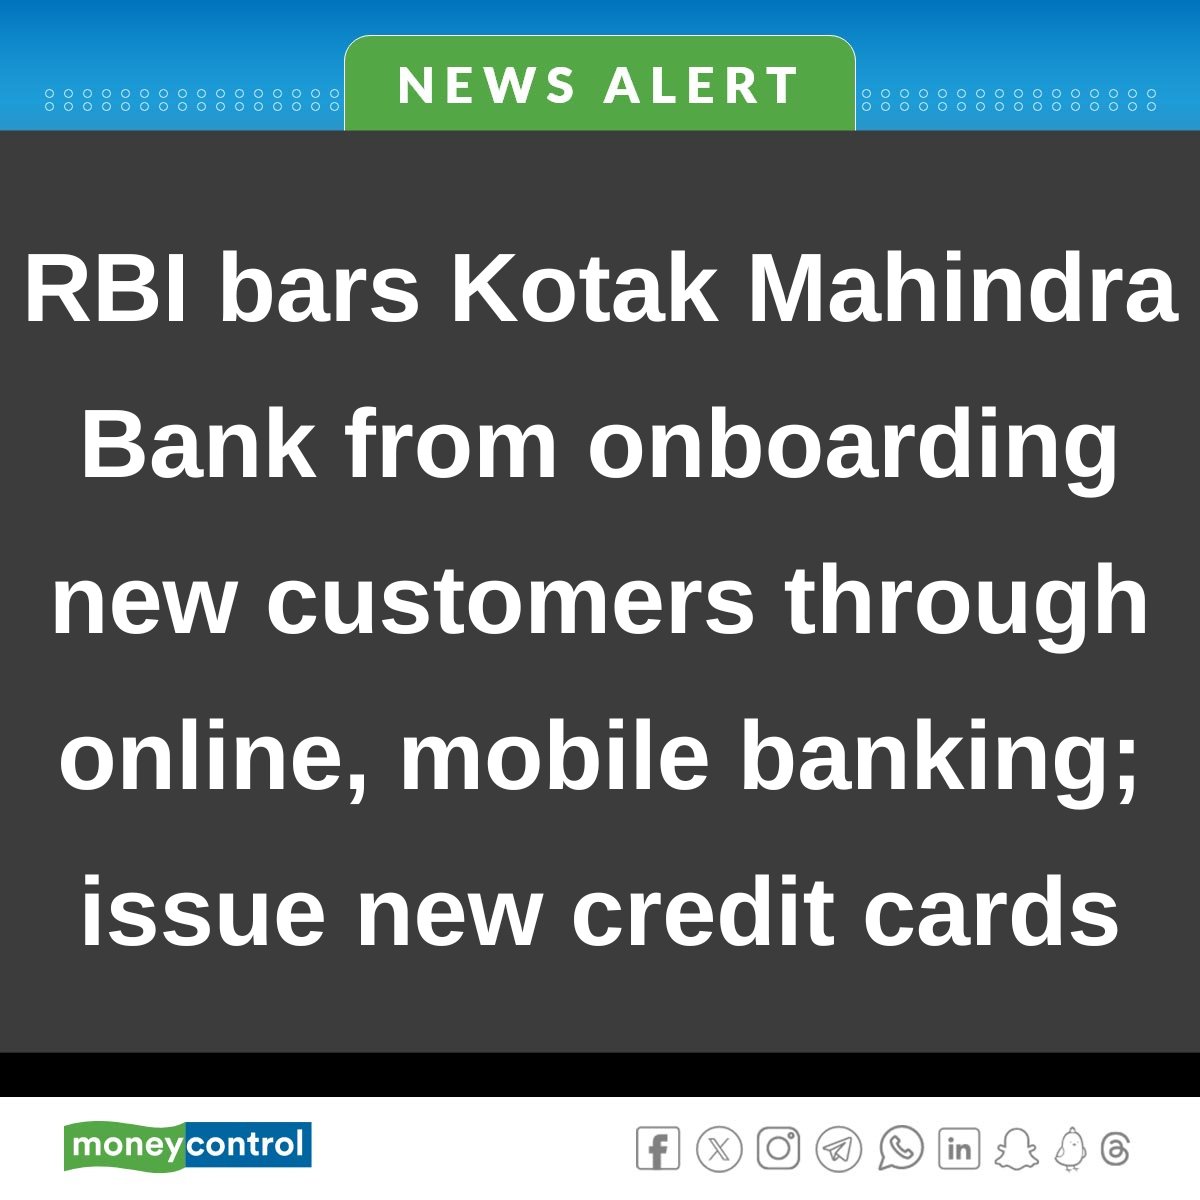 🚨 #BreakingNews

#RBI bars #KotakMahindraBank from onboarding new customers via its online and mobile channels, and from issuing new credit cards. Services can continue for existing customers. 

Details here  👇
moneycontrol.com/news/business/…

@rbi @KotakBankLtd